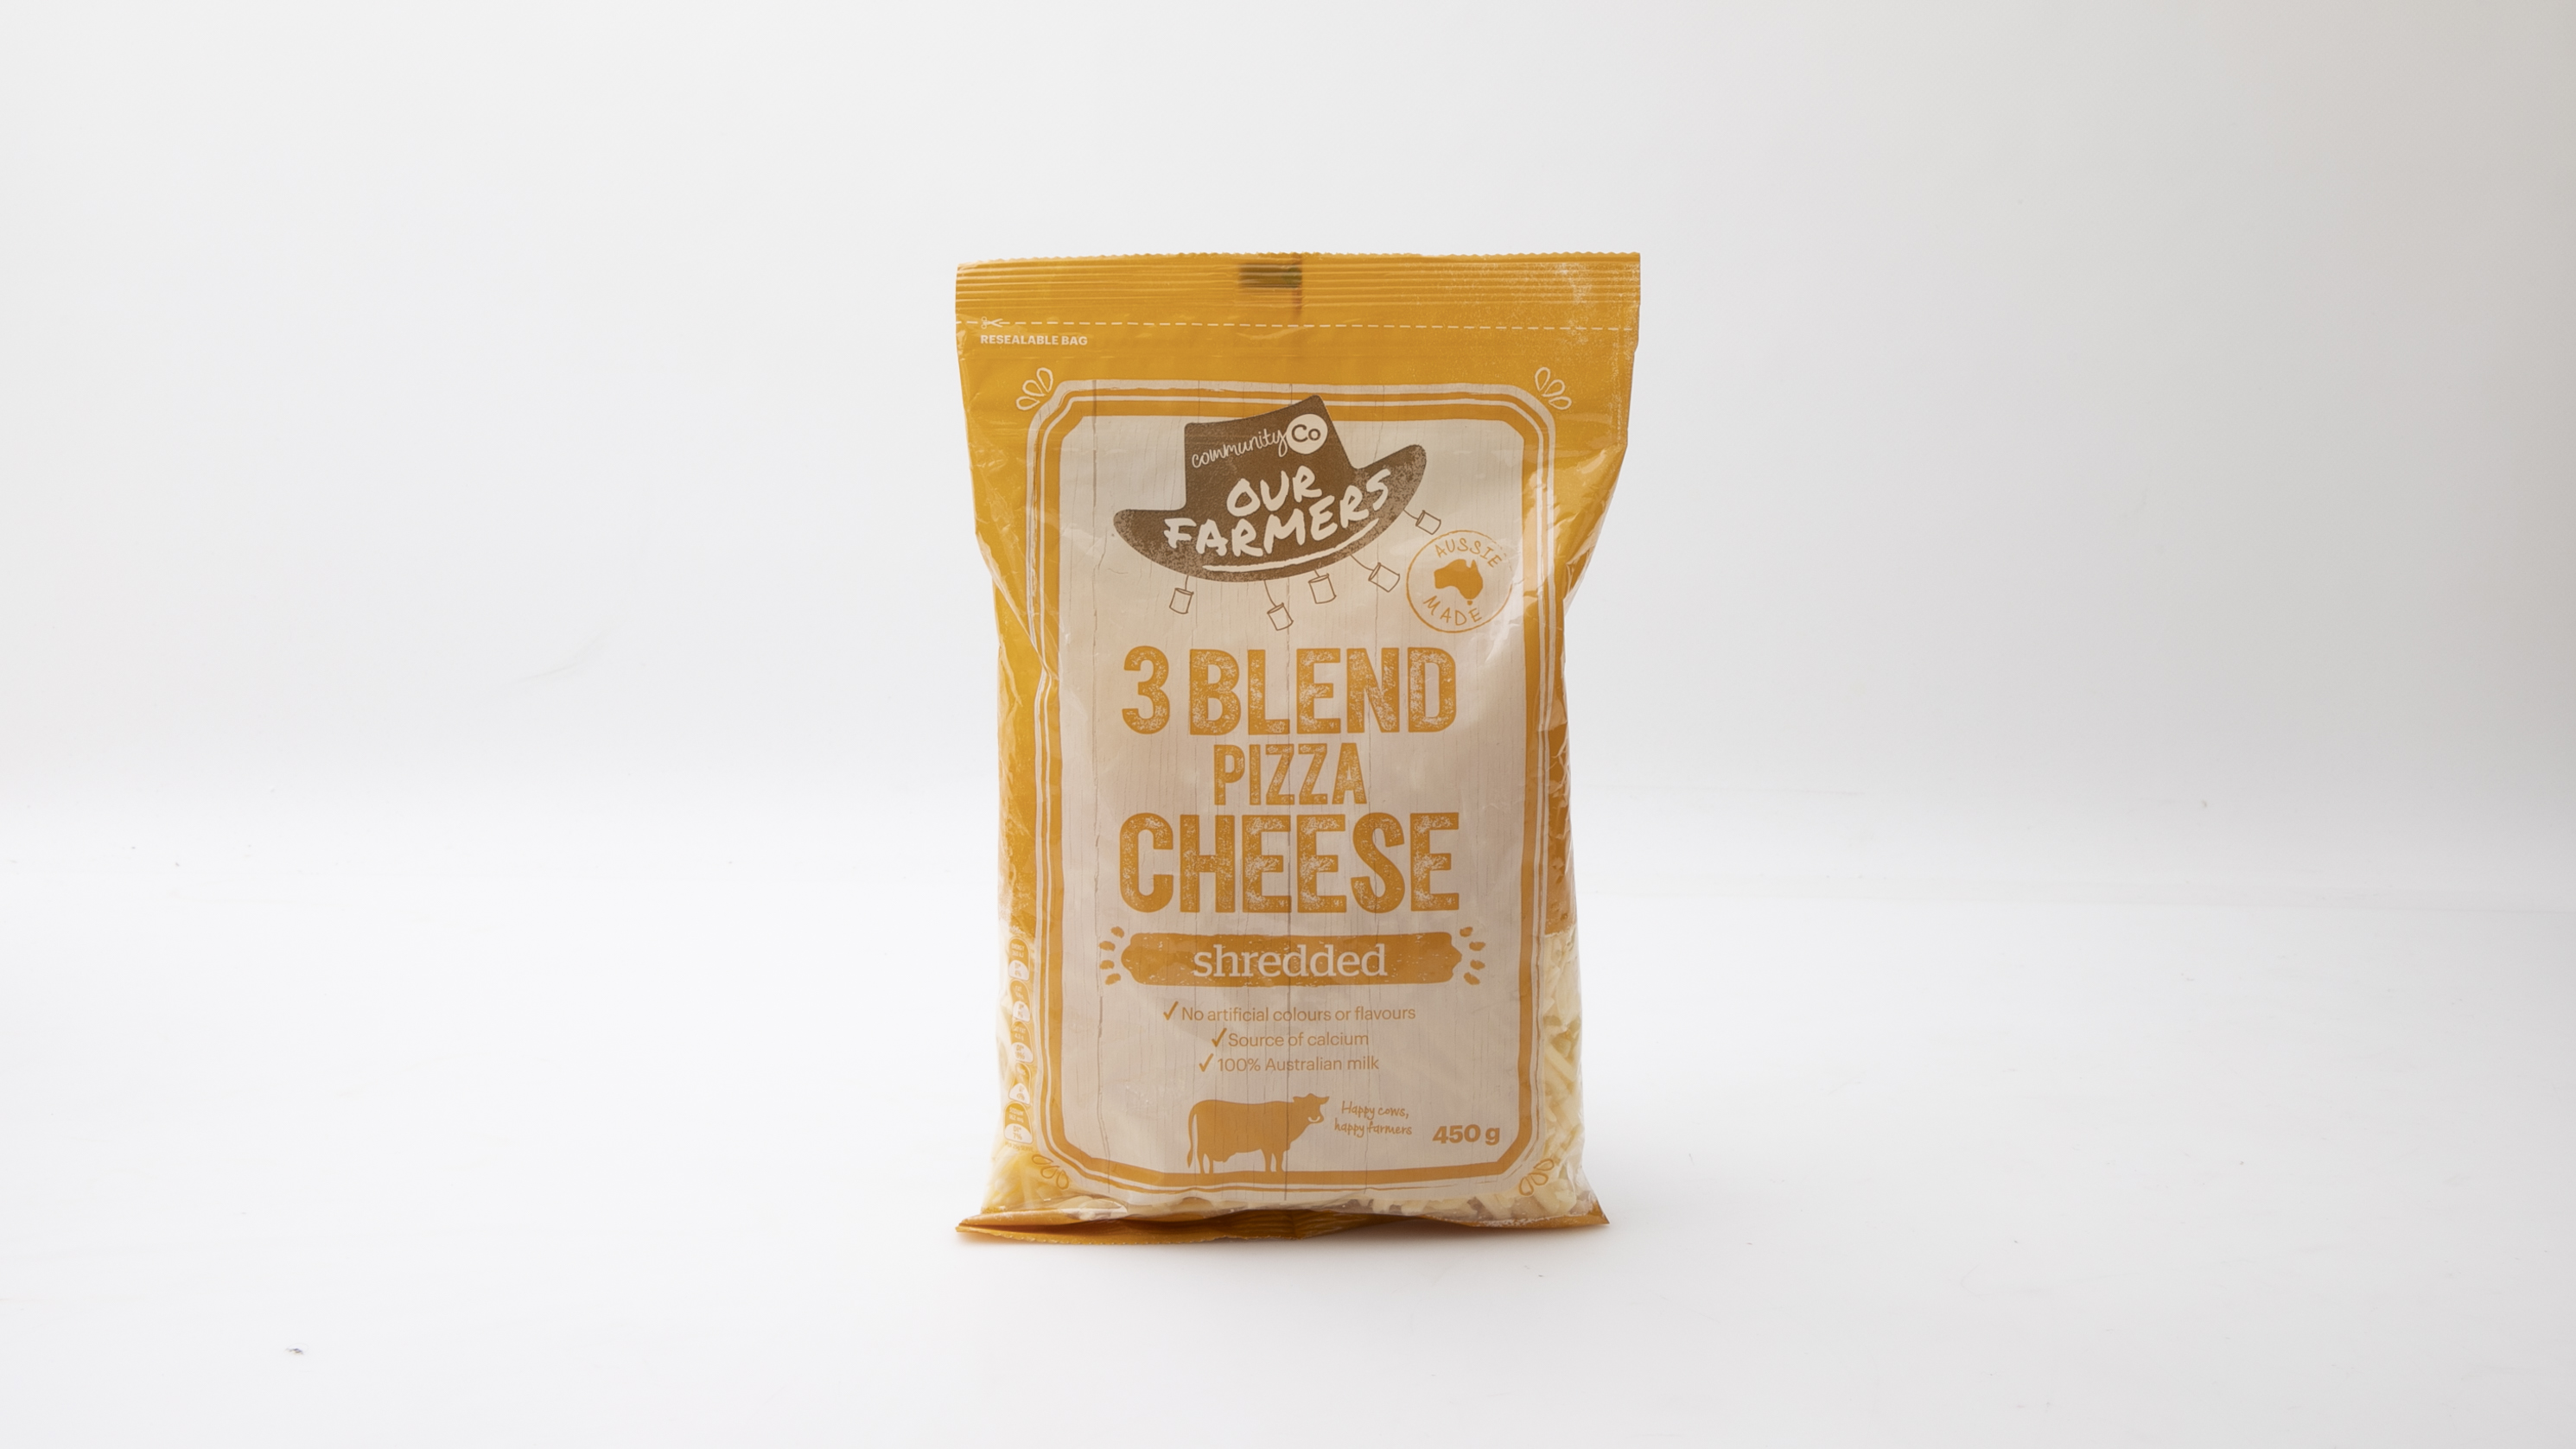 Community Co Our Farmers 3 Blend Pizza Cheese Shredded carousel image